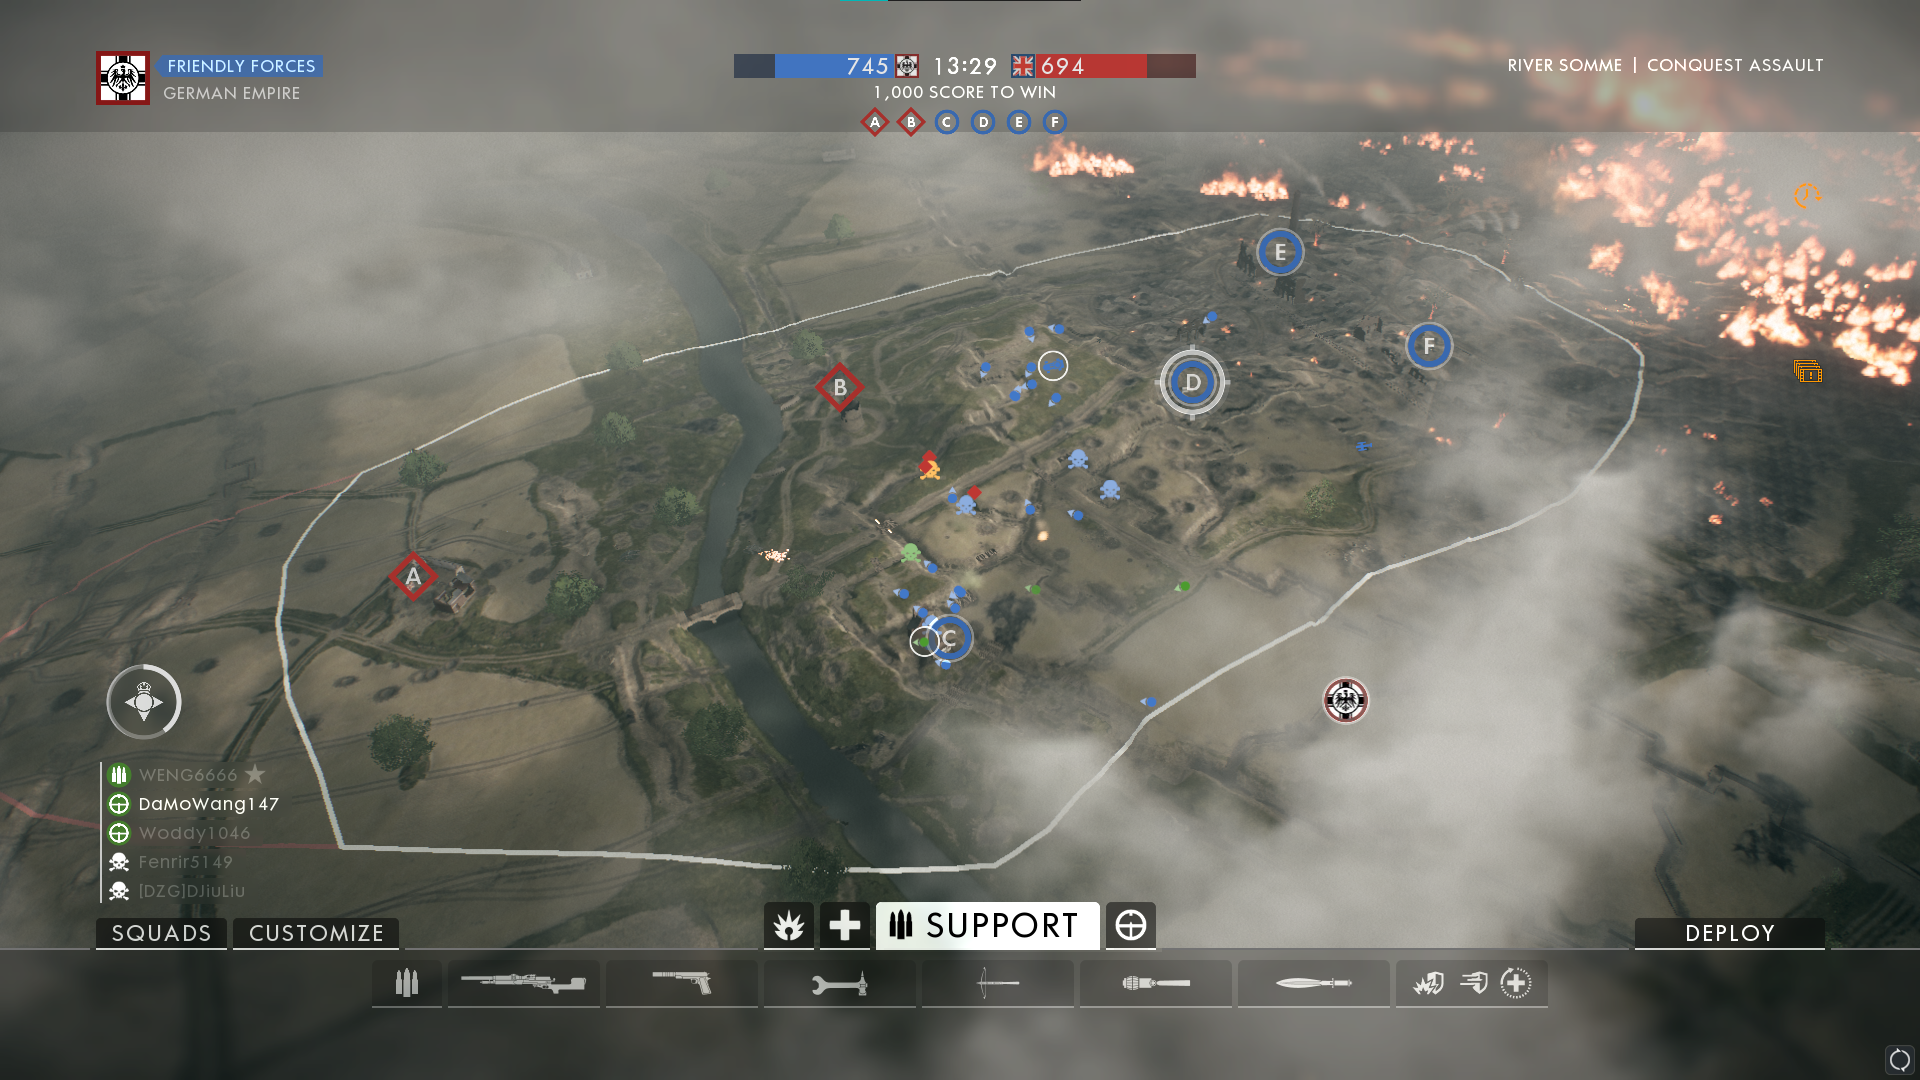 how to rank up medic in battlefield 1